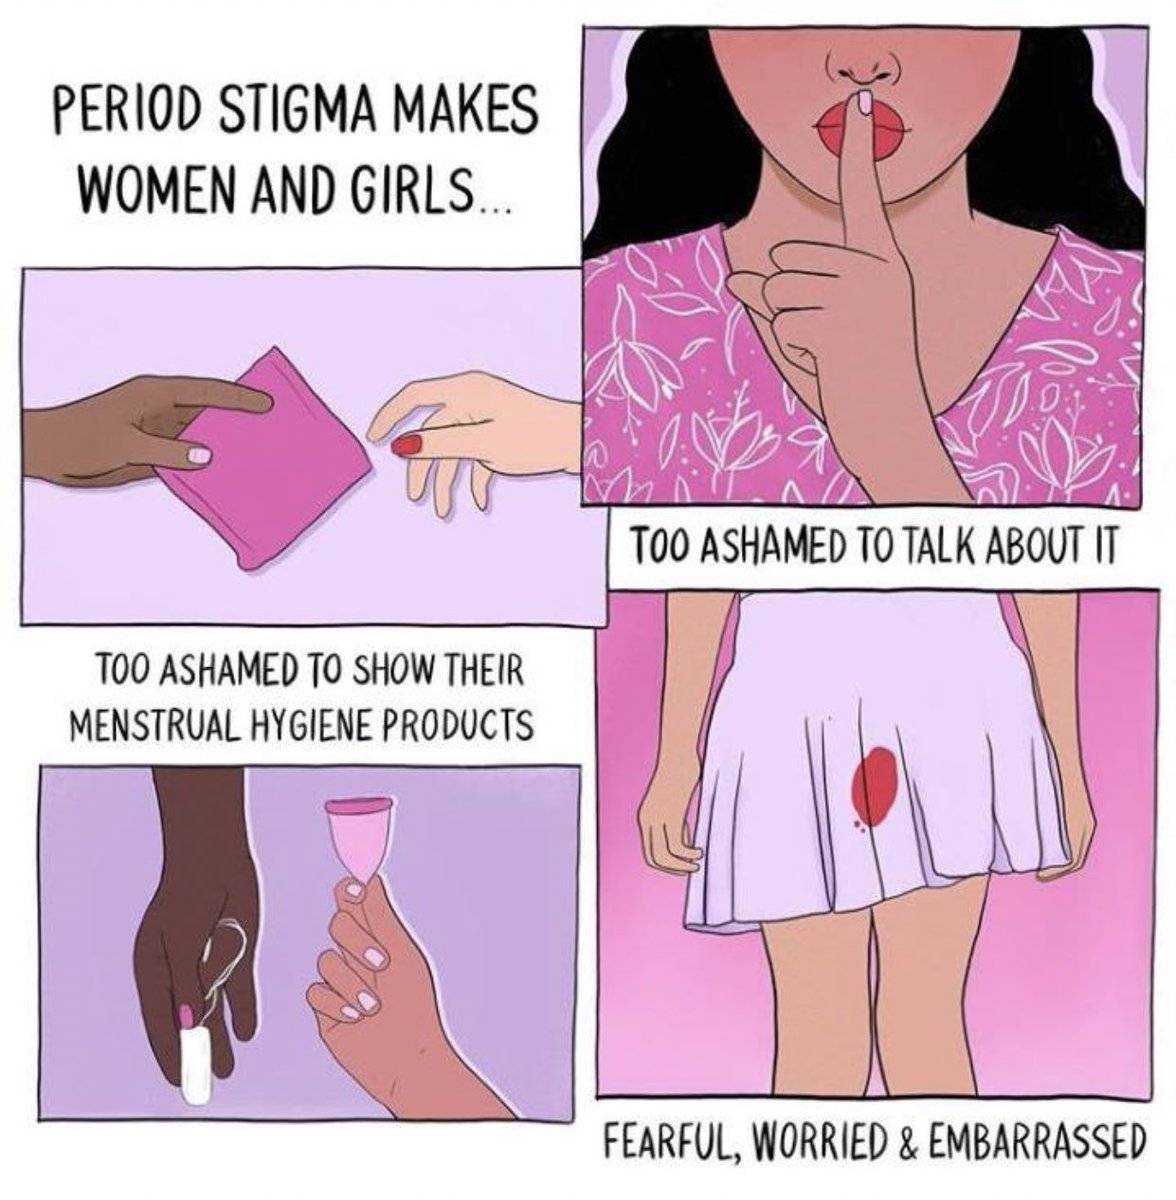 Let us all normalize menstraution and provide support to women and girls not stigmatize!! #MenstrualHygieneDay2020